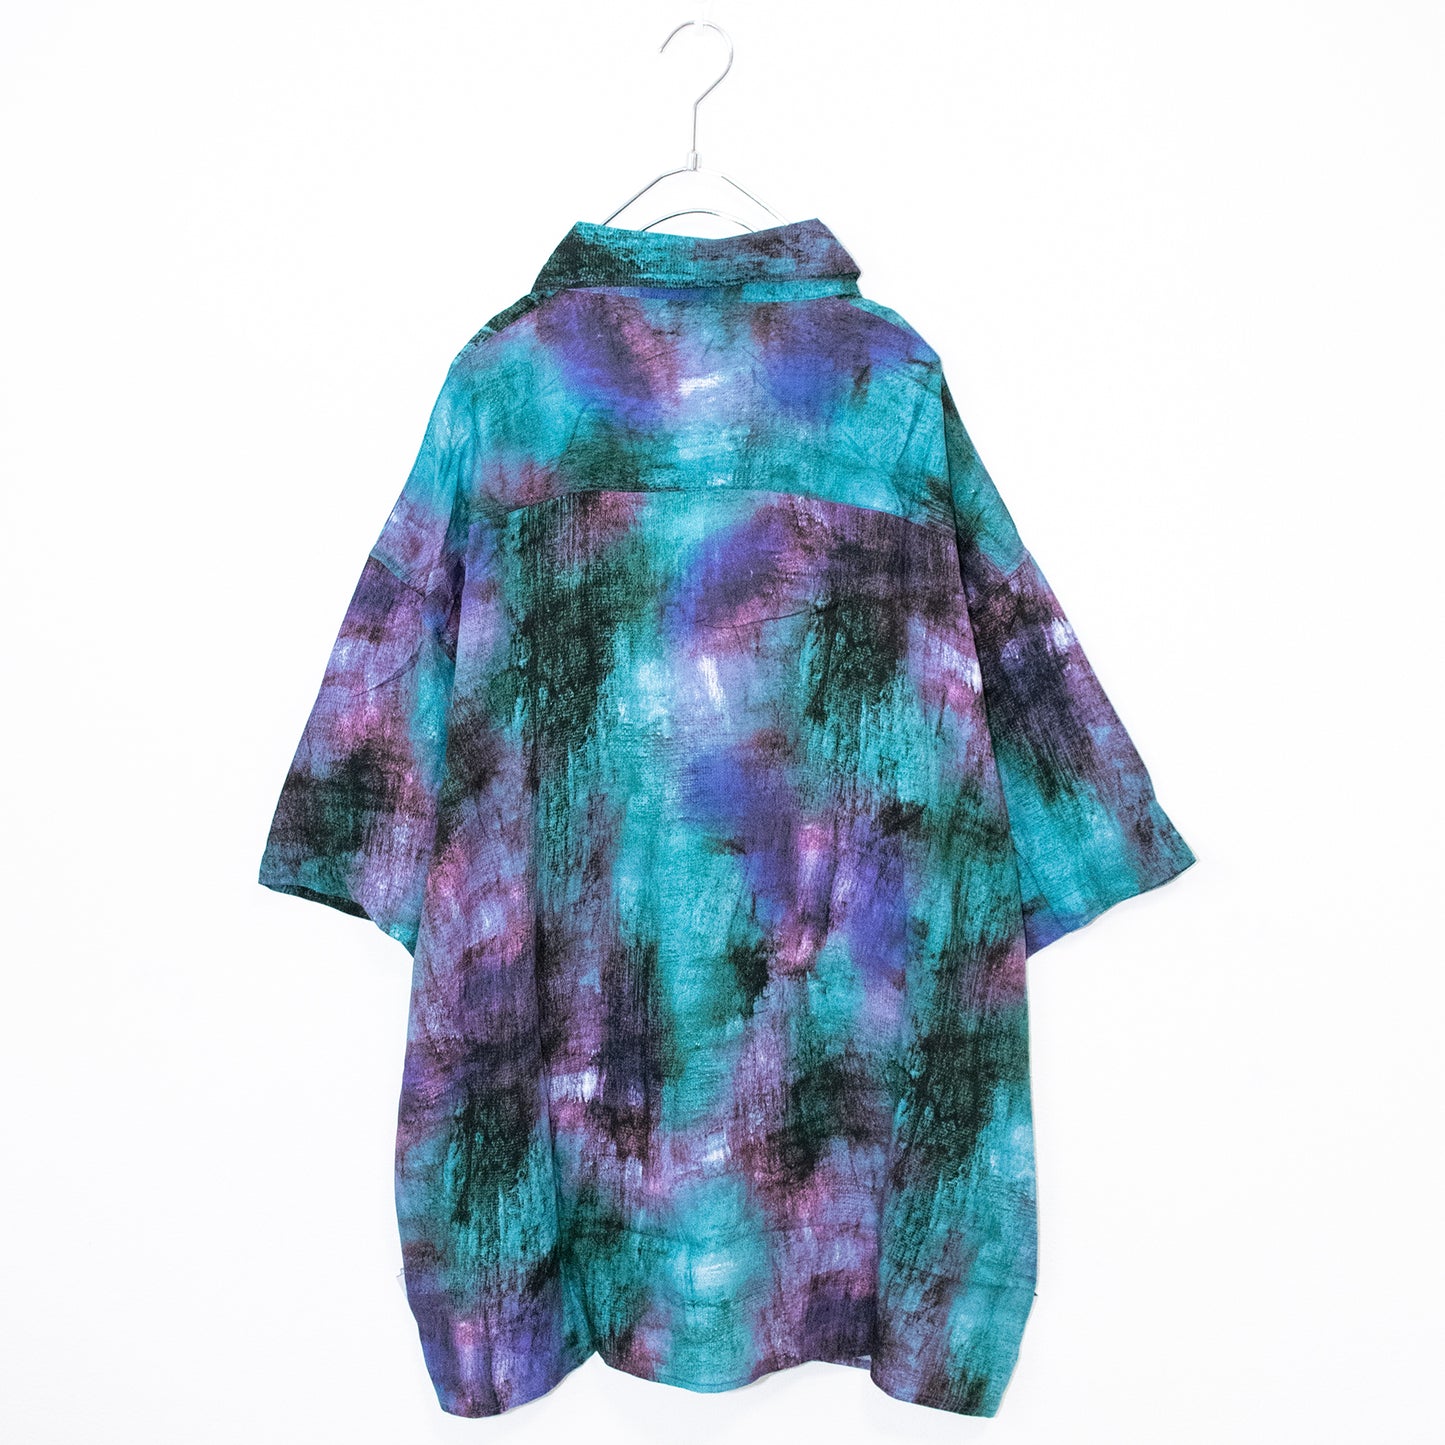 BIG All-over S/S Shirt (Turquoise Blue) - YOUAREMYPOISON